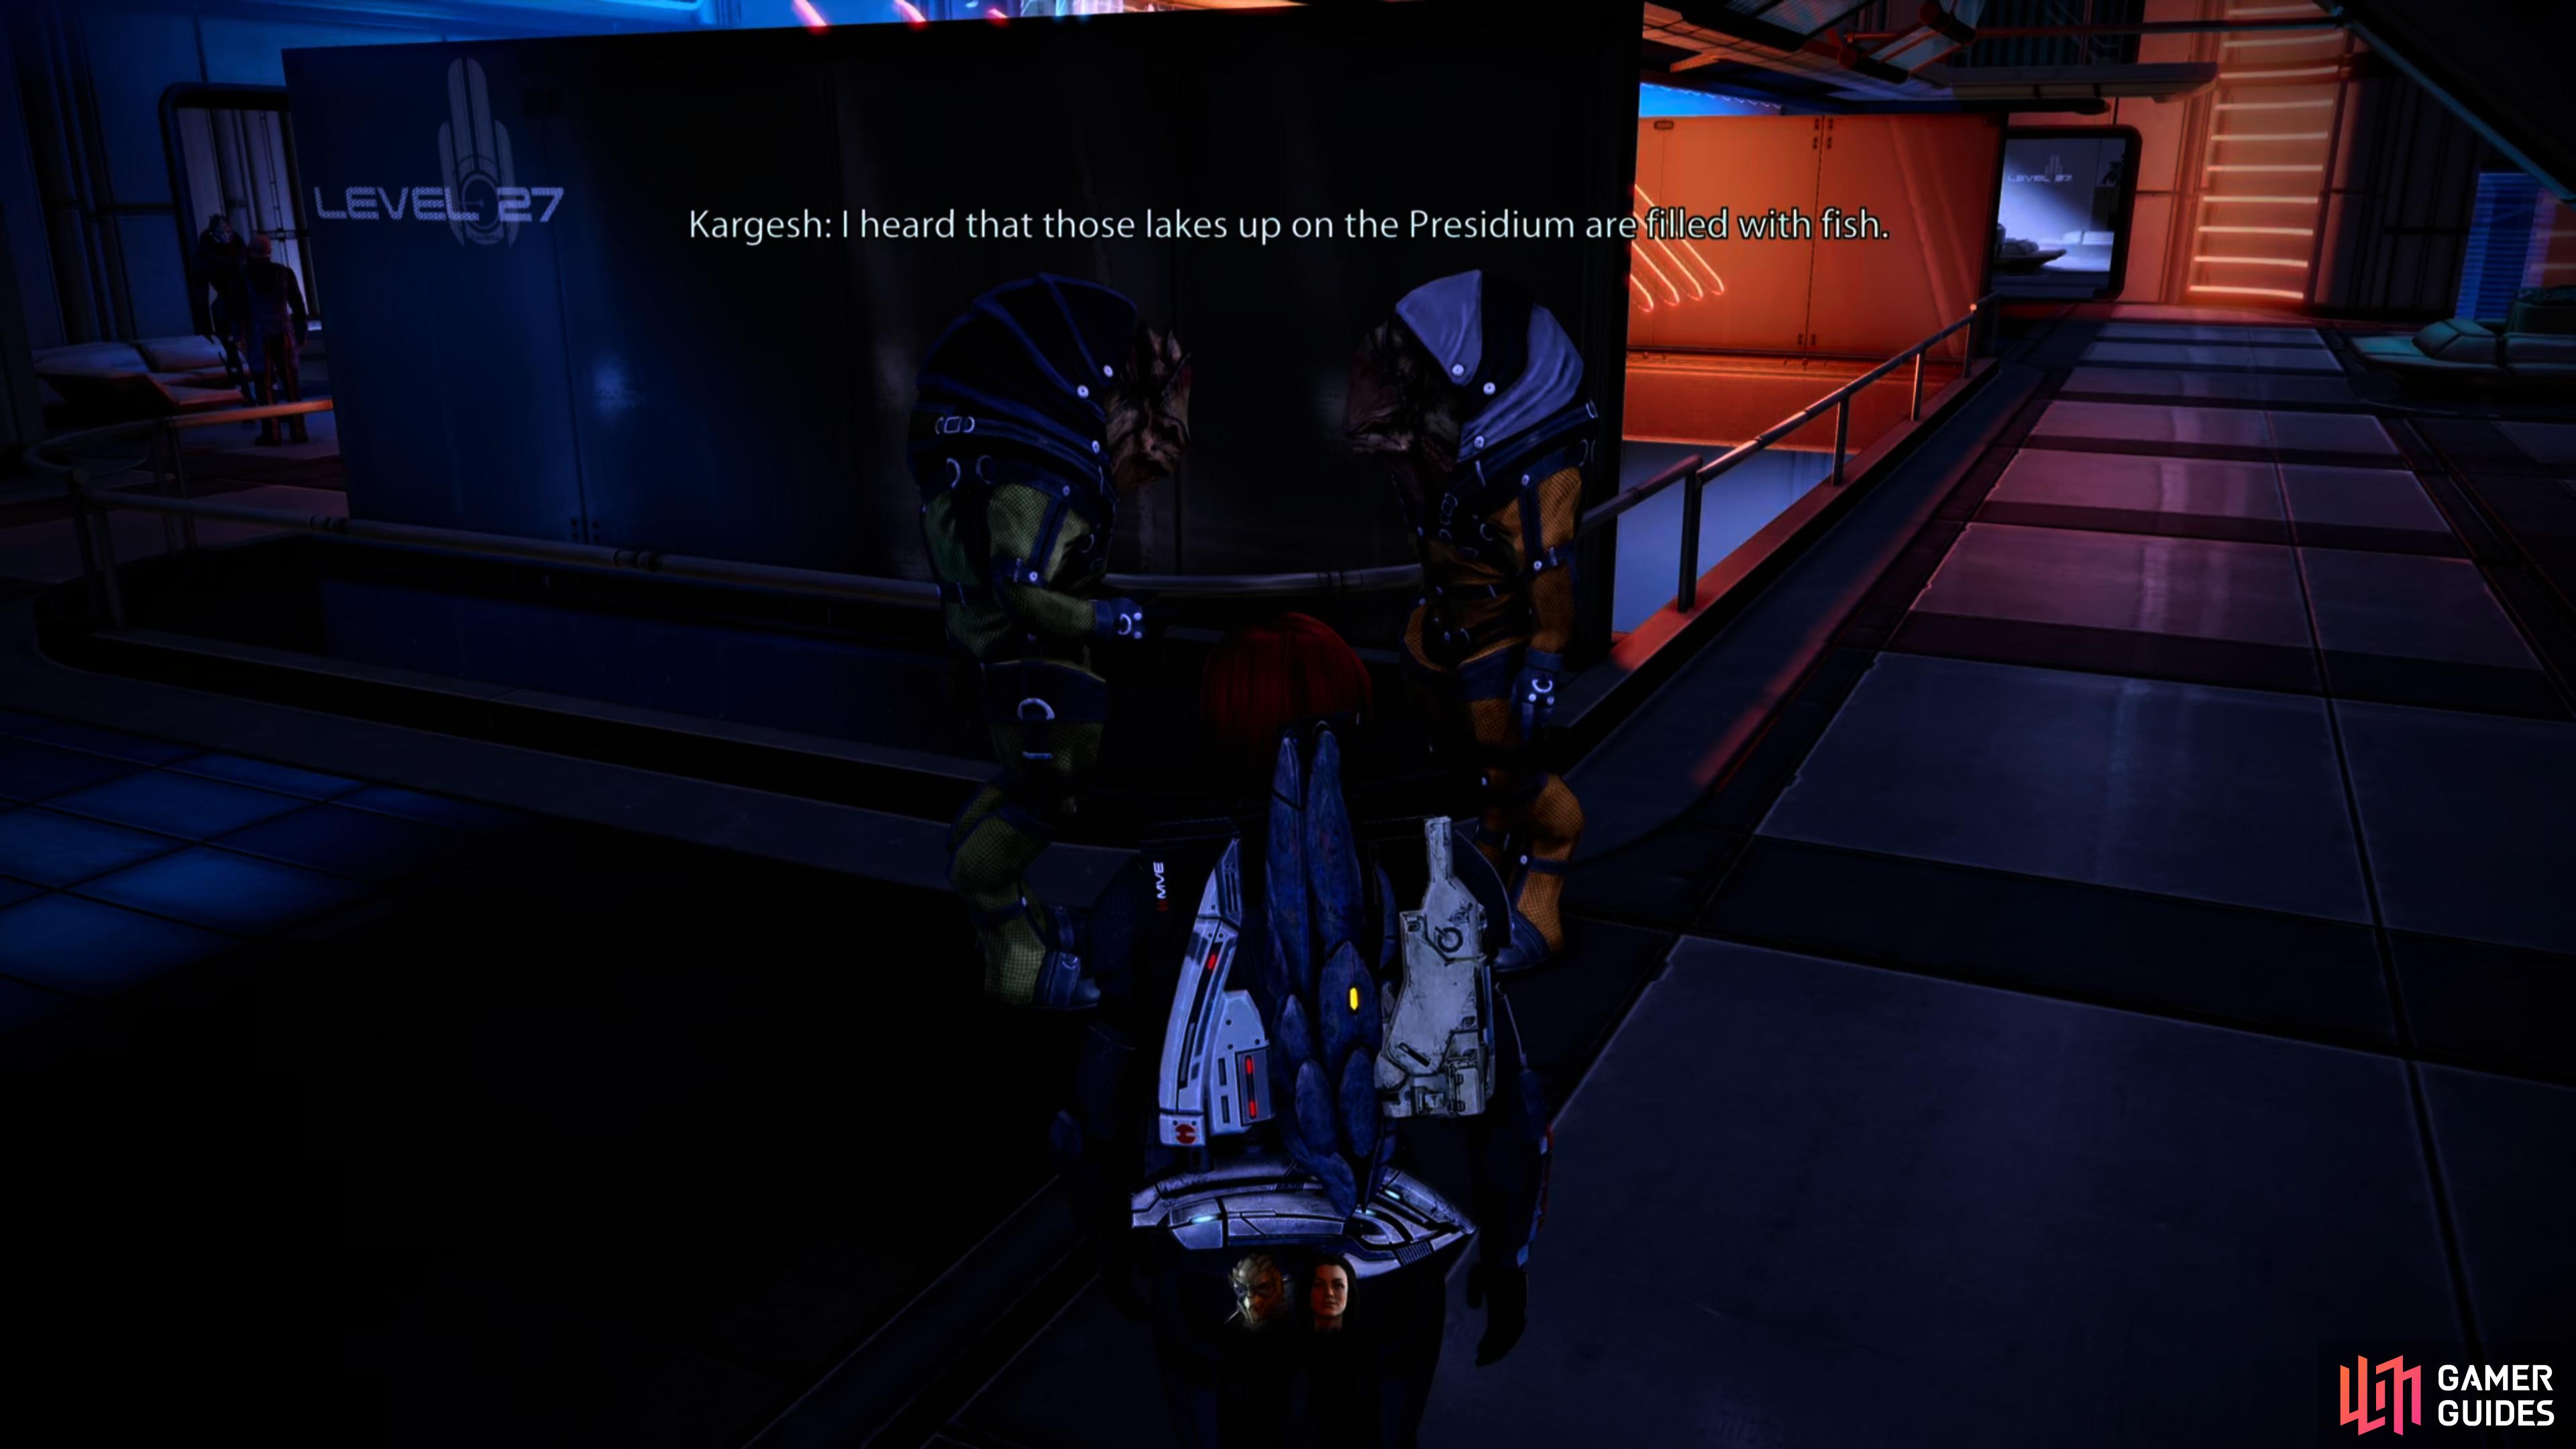 On Zakera Ward you'll overhear some Krogan speculating about fish in the Presidium lakes.